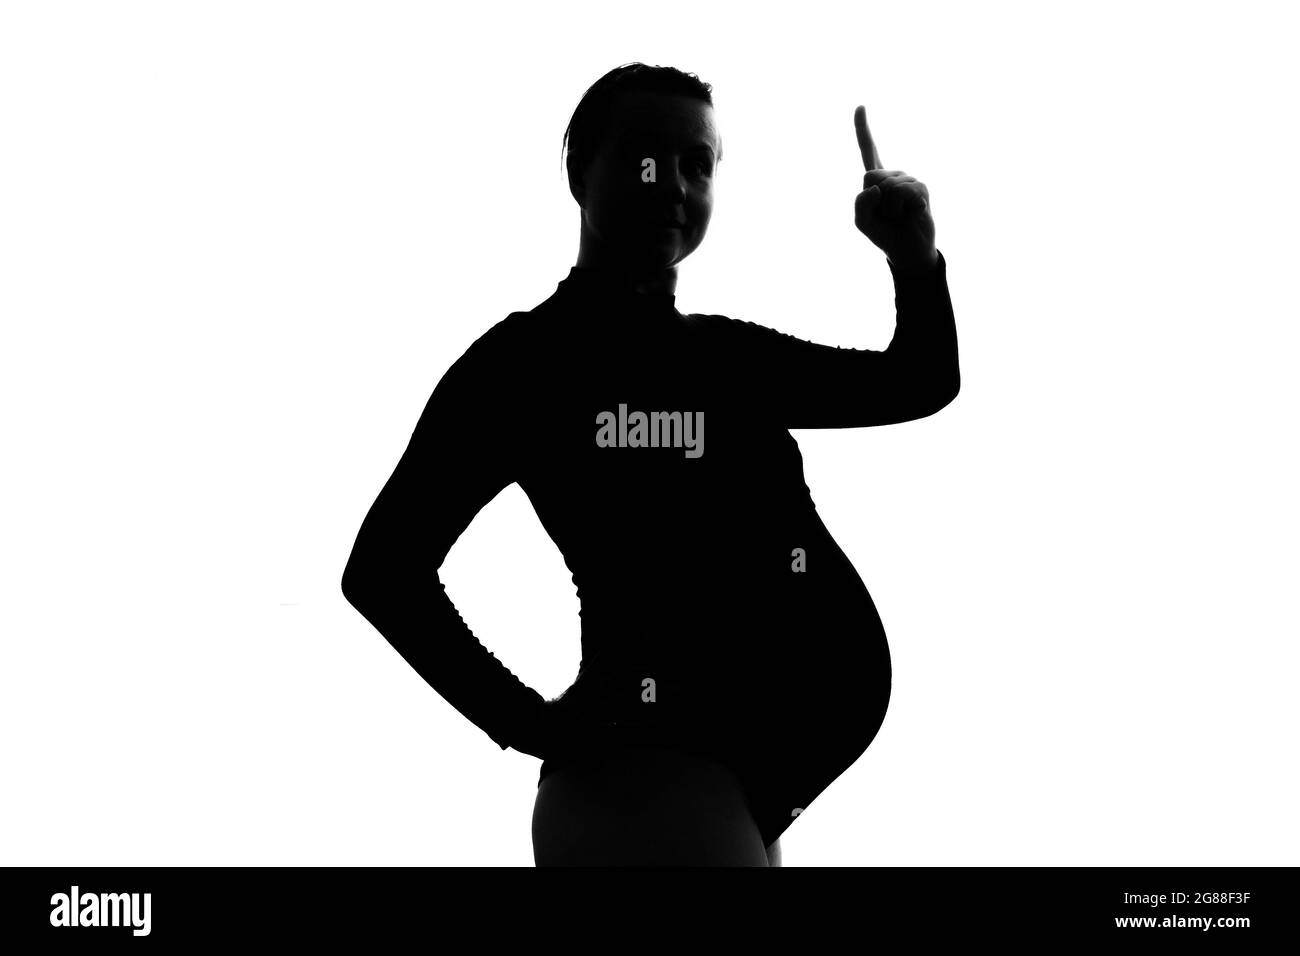 Pregnant woman raising index finger up giving advice or pointing on important information. Stock Photo